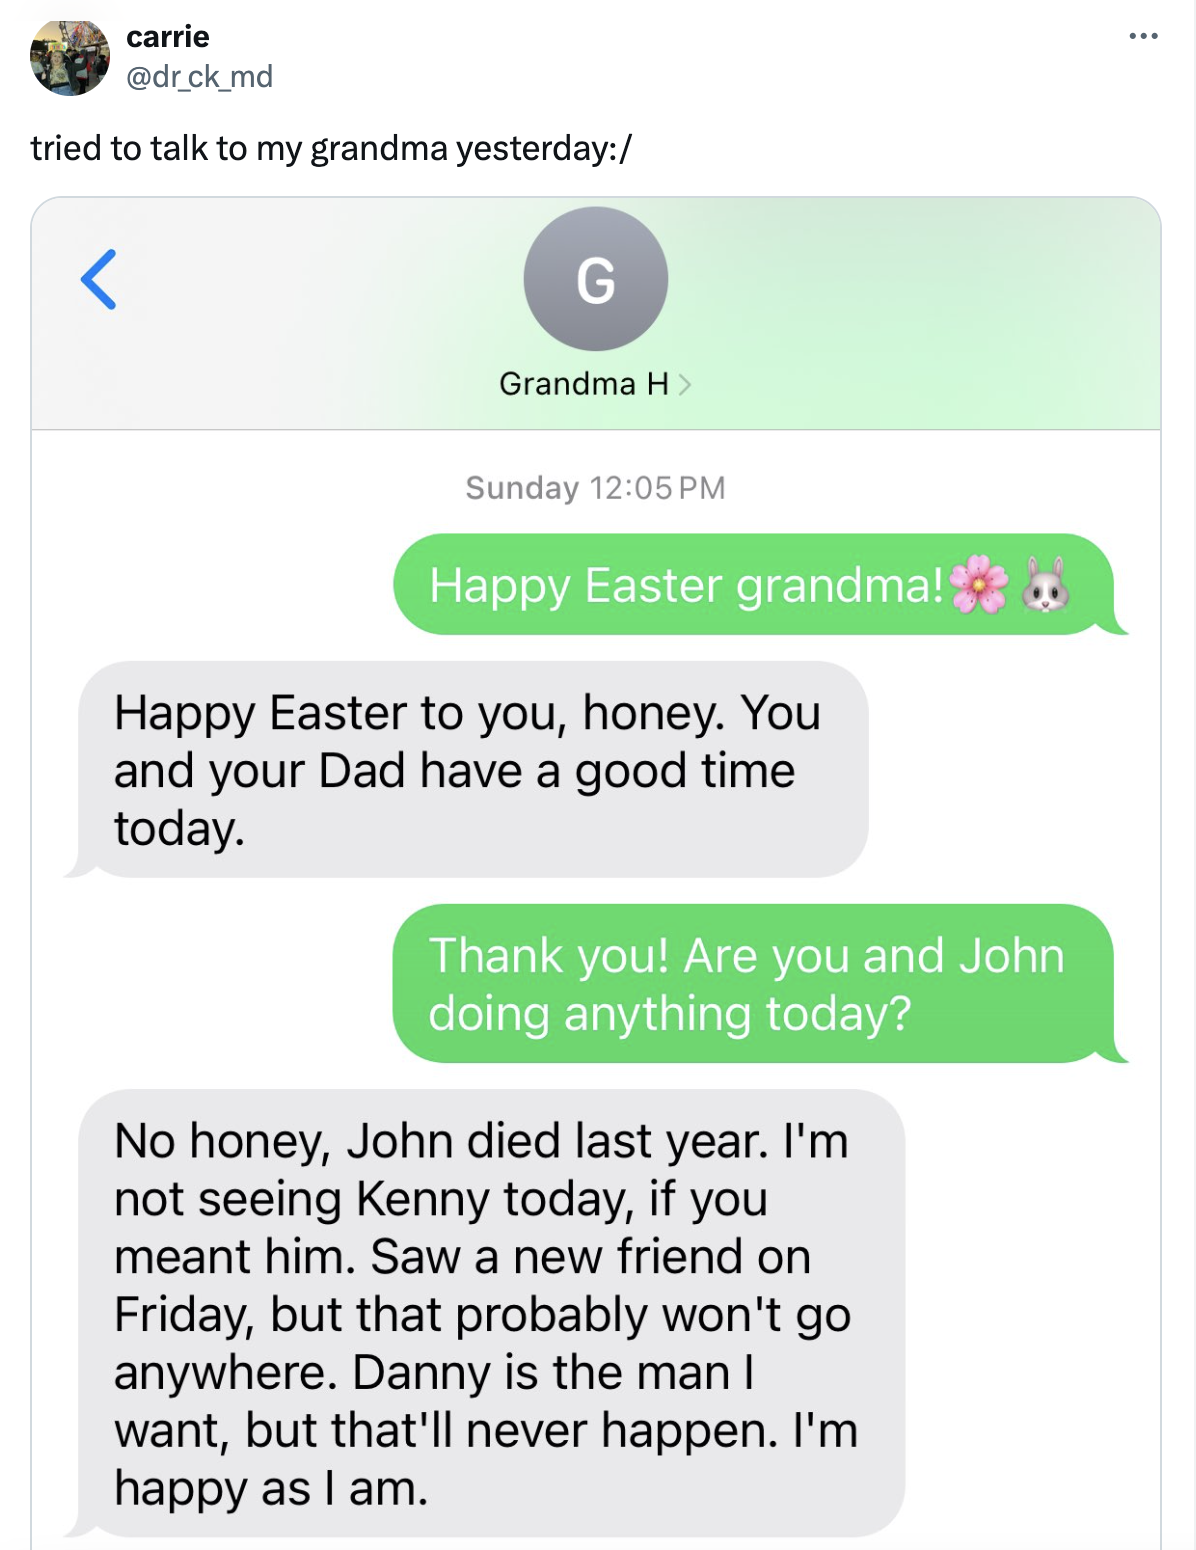 screenshot - carrie tried to talk to my grandma yesterday G Grandma H Sunday Happy Easter grandma! Happy Easter to you, honey. You and your Dad have a good time today. Thank you! Are you and John doing anything today? No honey, John died last year. I'm no